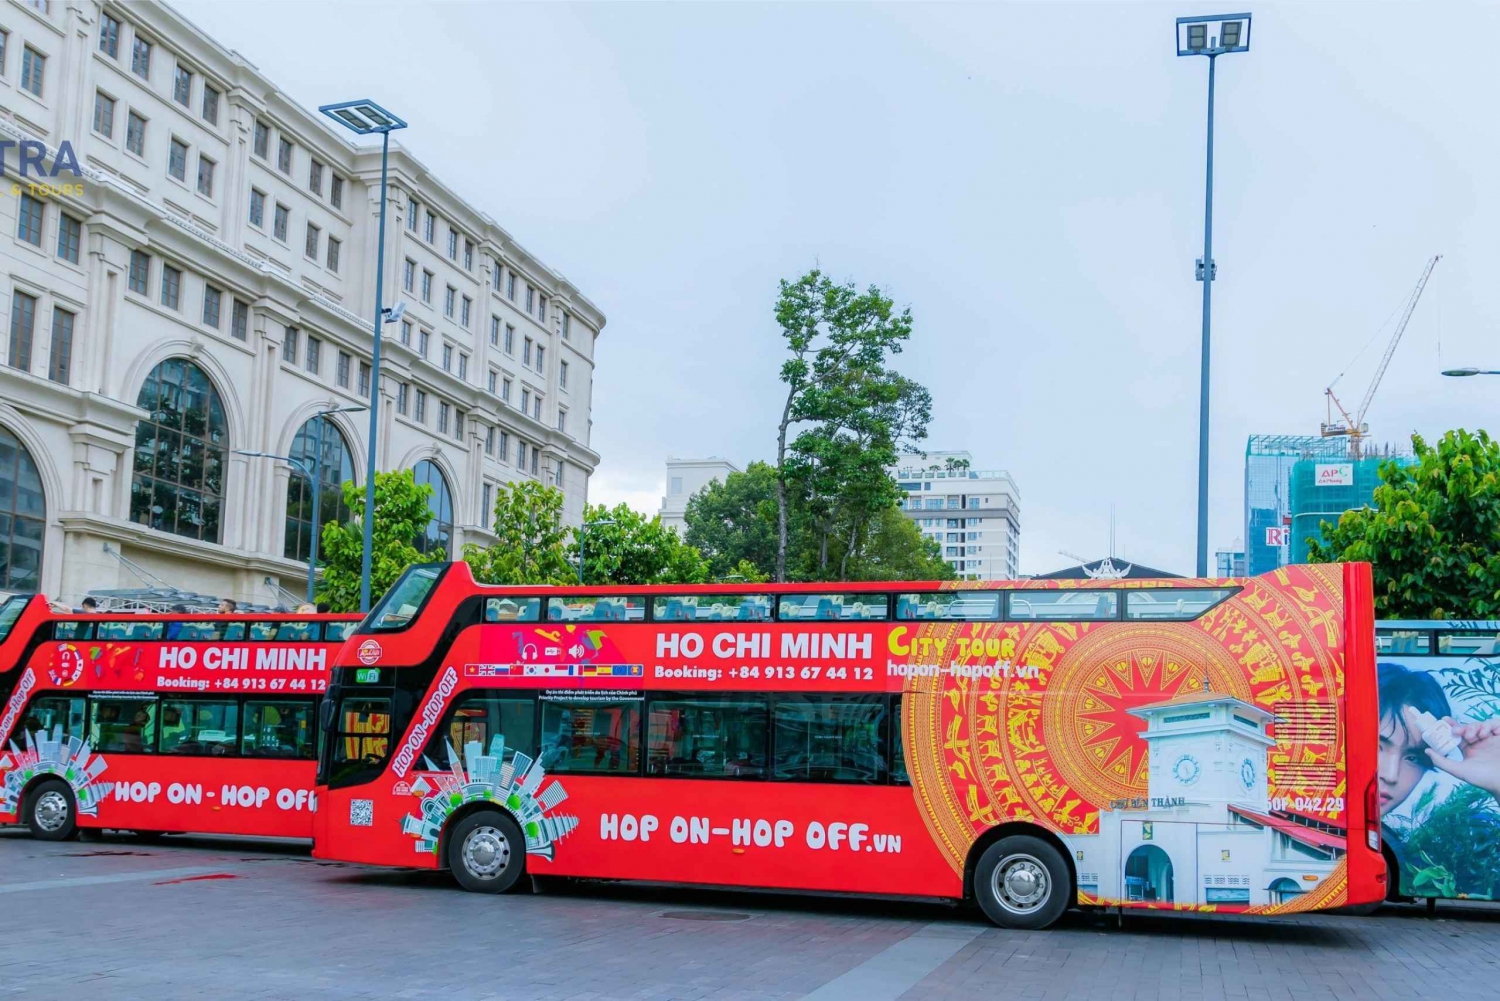 Ho Chi Minh City: Hop-On Hop-Off Sightseeing Double-Decker